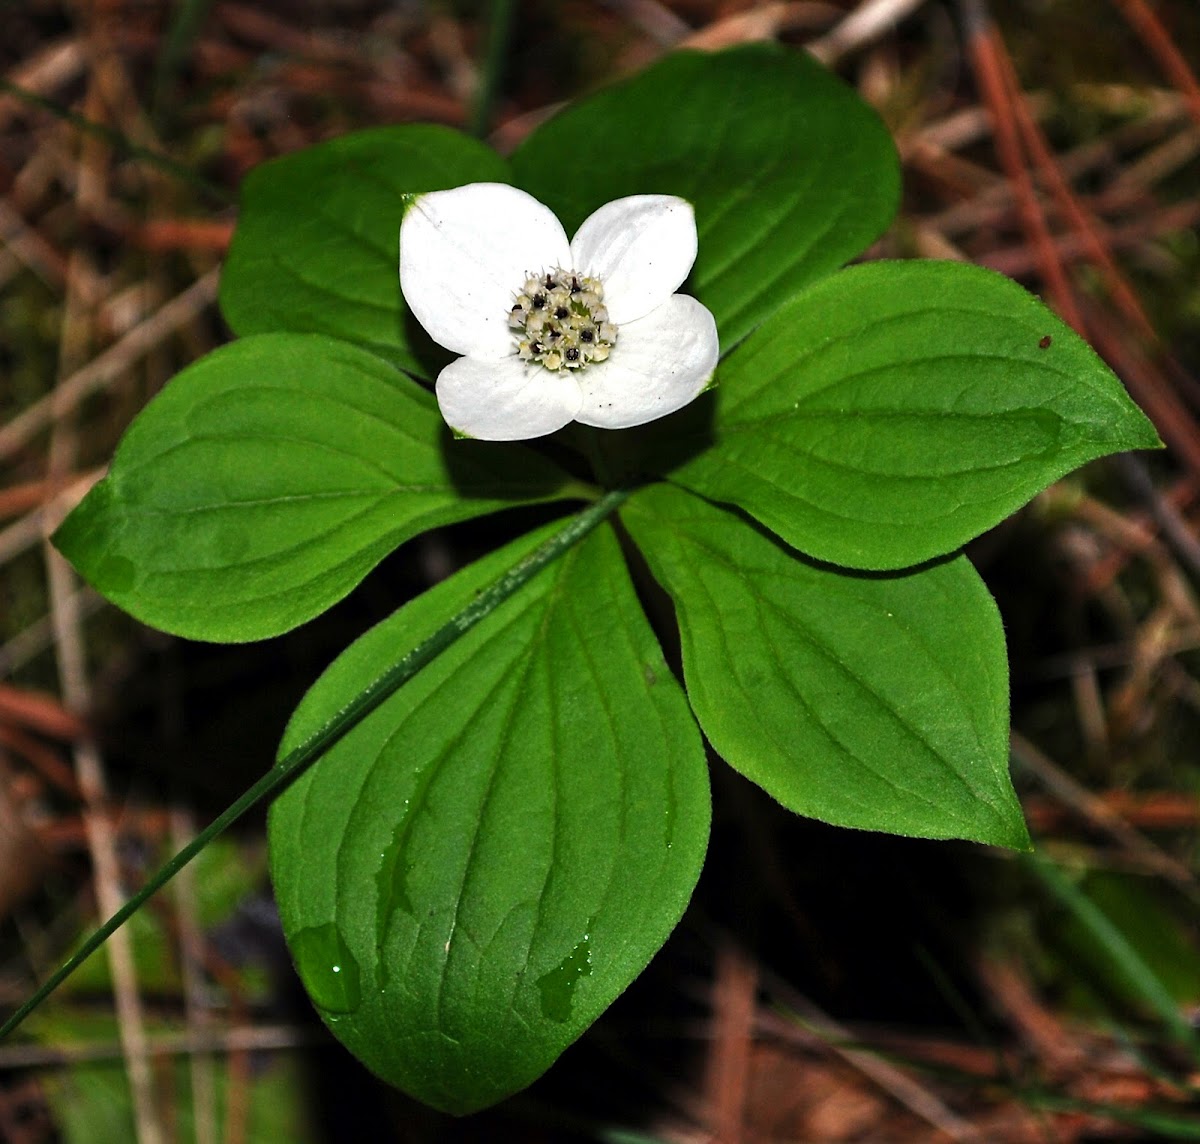 Bunchberry